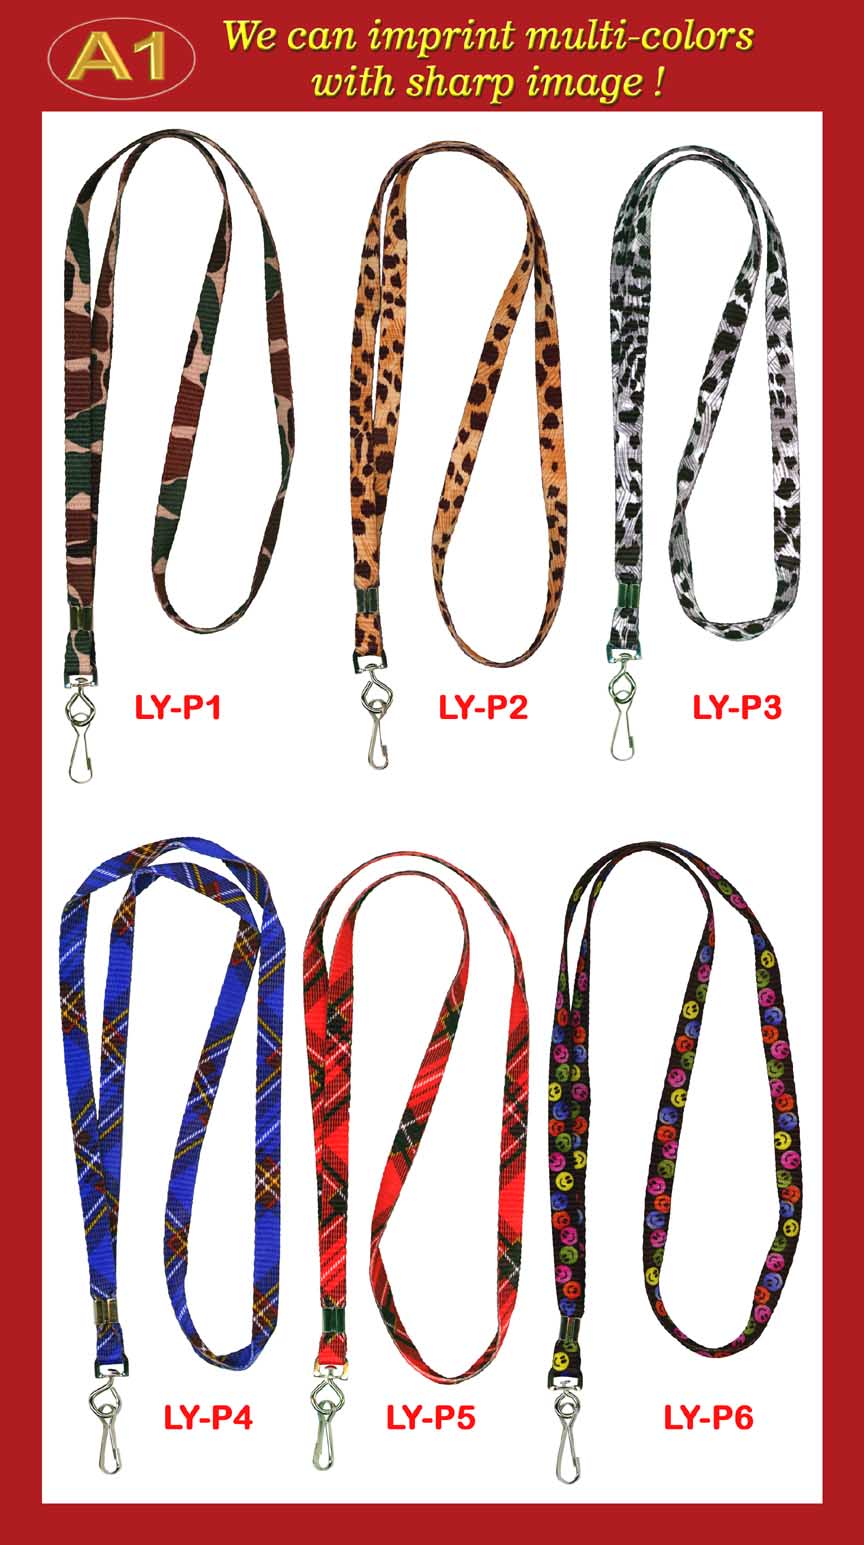 High-Quality and Heavy-Duty Colorful Lanyards